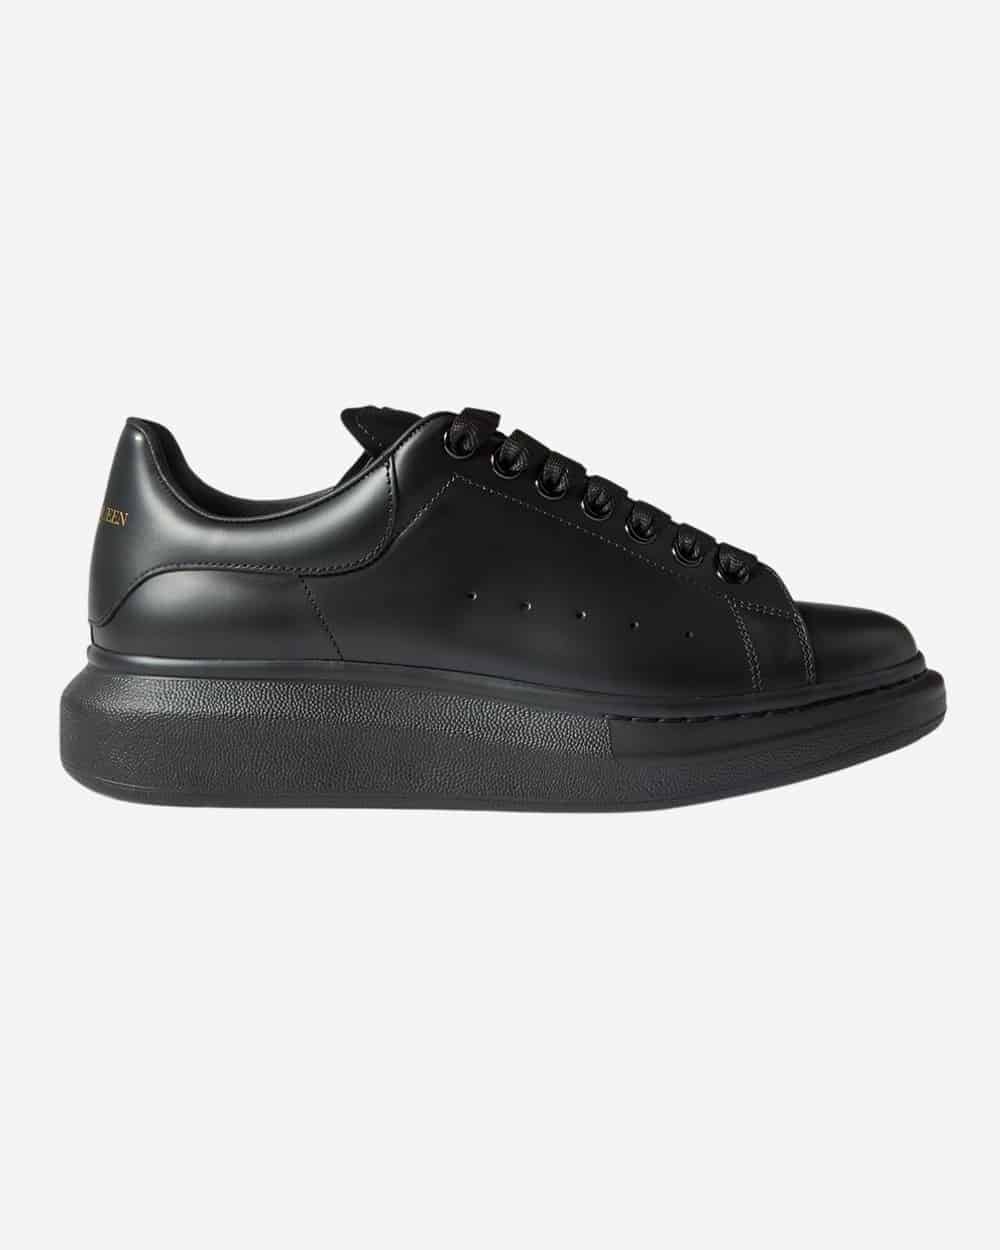 Alexander McQueen Exaggerated Sole Studded Leather Sneakers